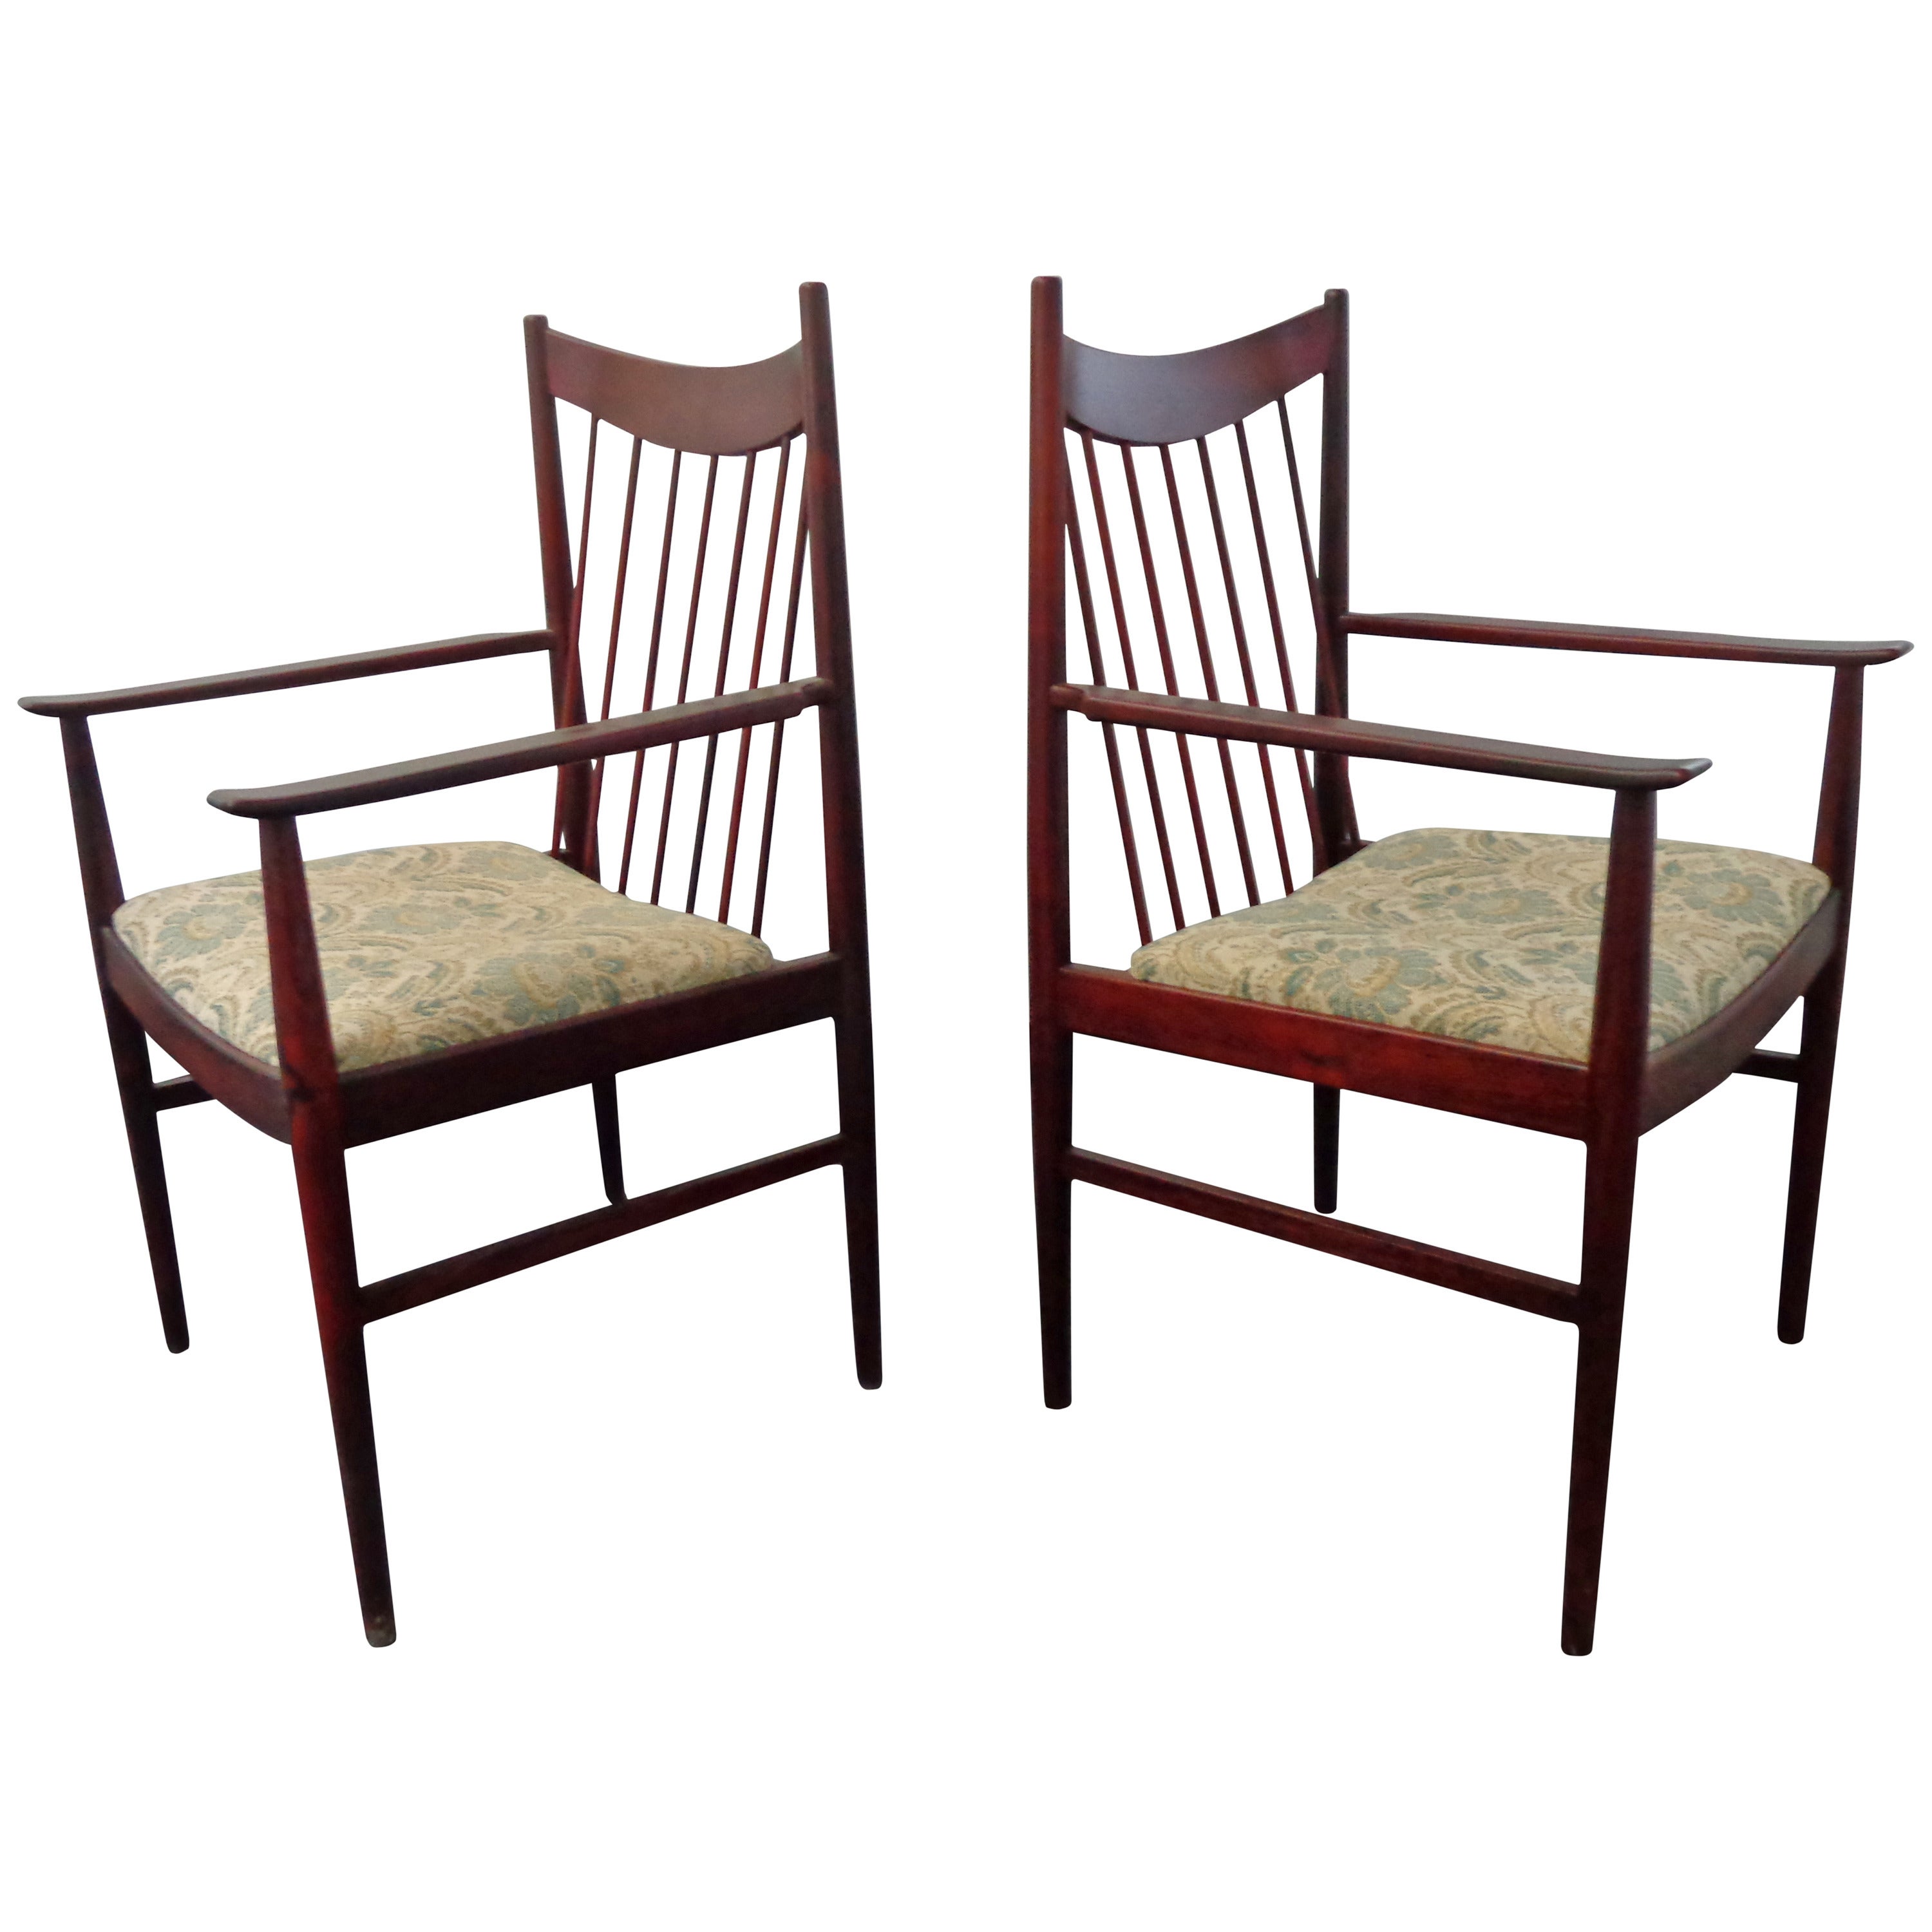 Arne Vodder Rosewood Chairs, Model 422 by Sibast, Including Two Armchairs